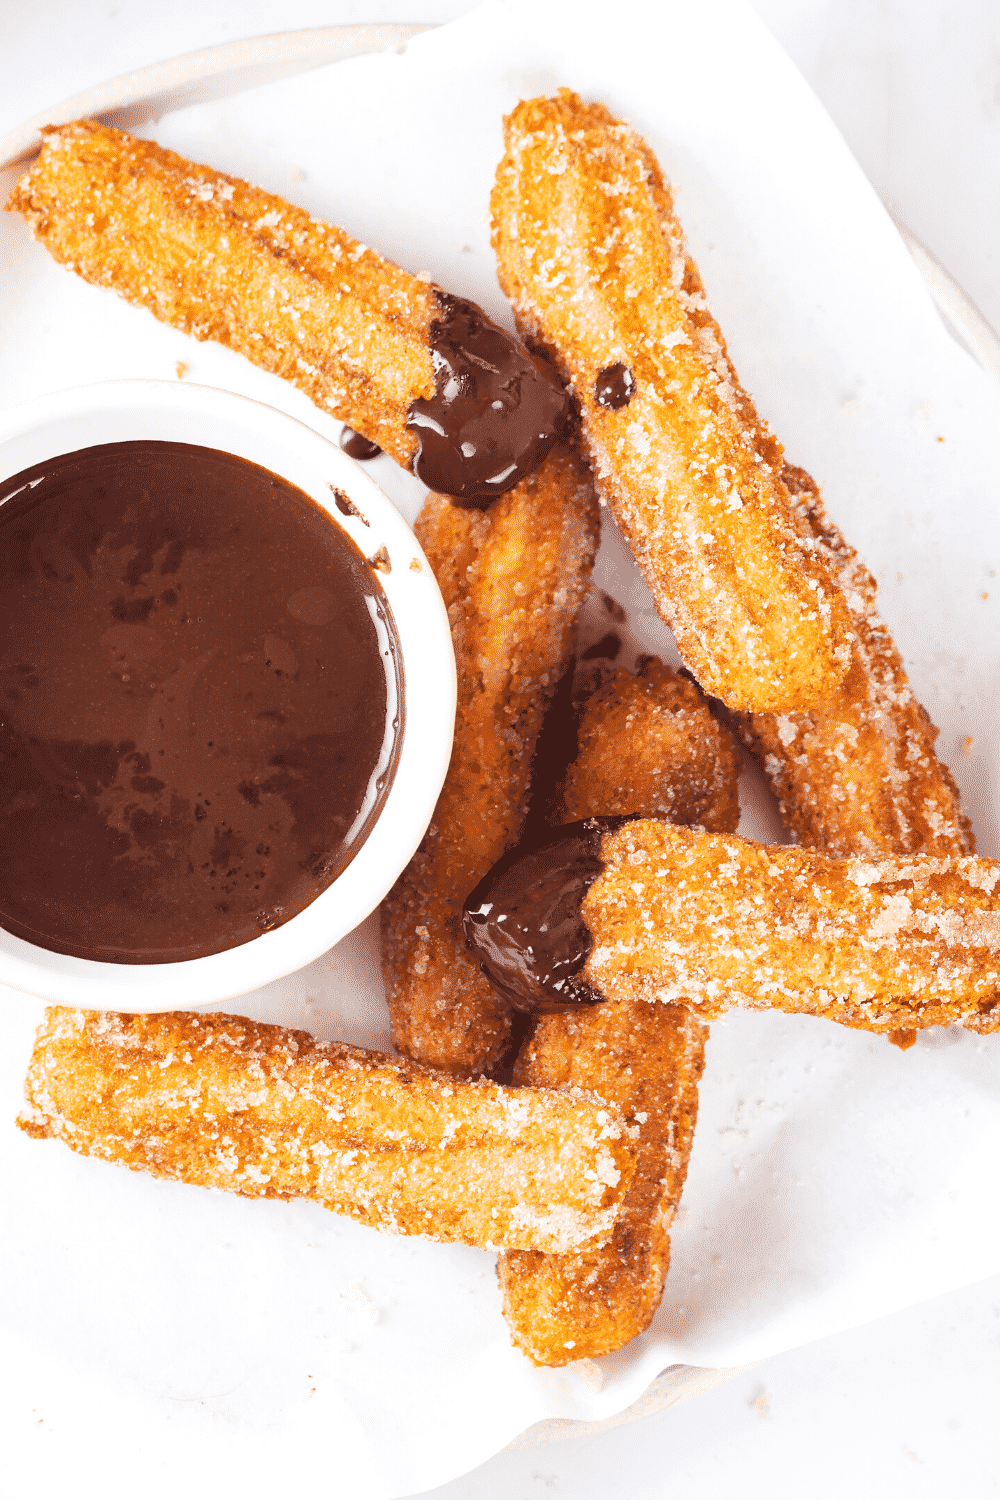 Seven churros overlapping one another on a piece of white parchment paper on a white plate. There is a cup of chocolate sauce to the left of the churros and two churros have chocolate sauce on the tip of them.